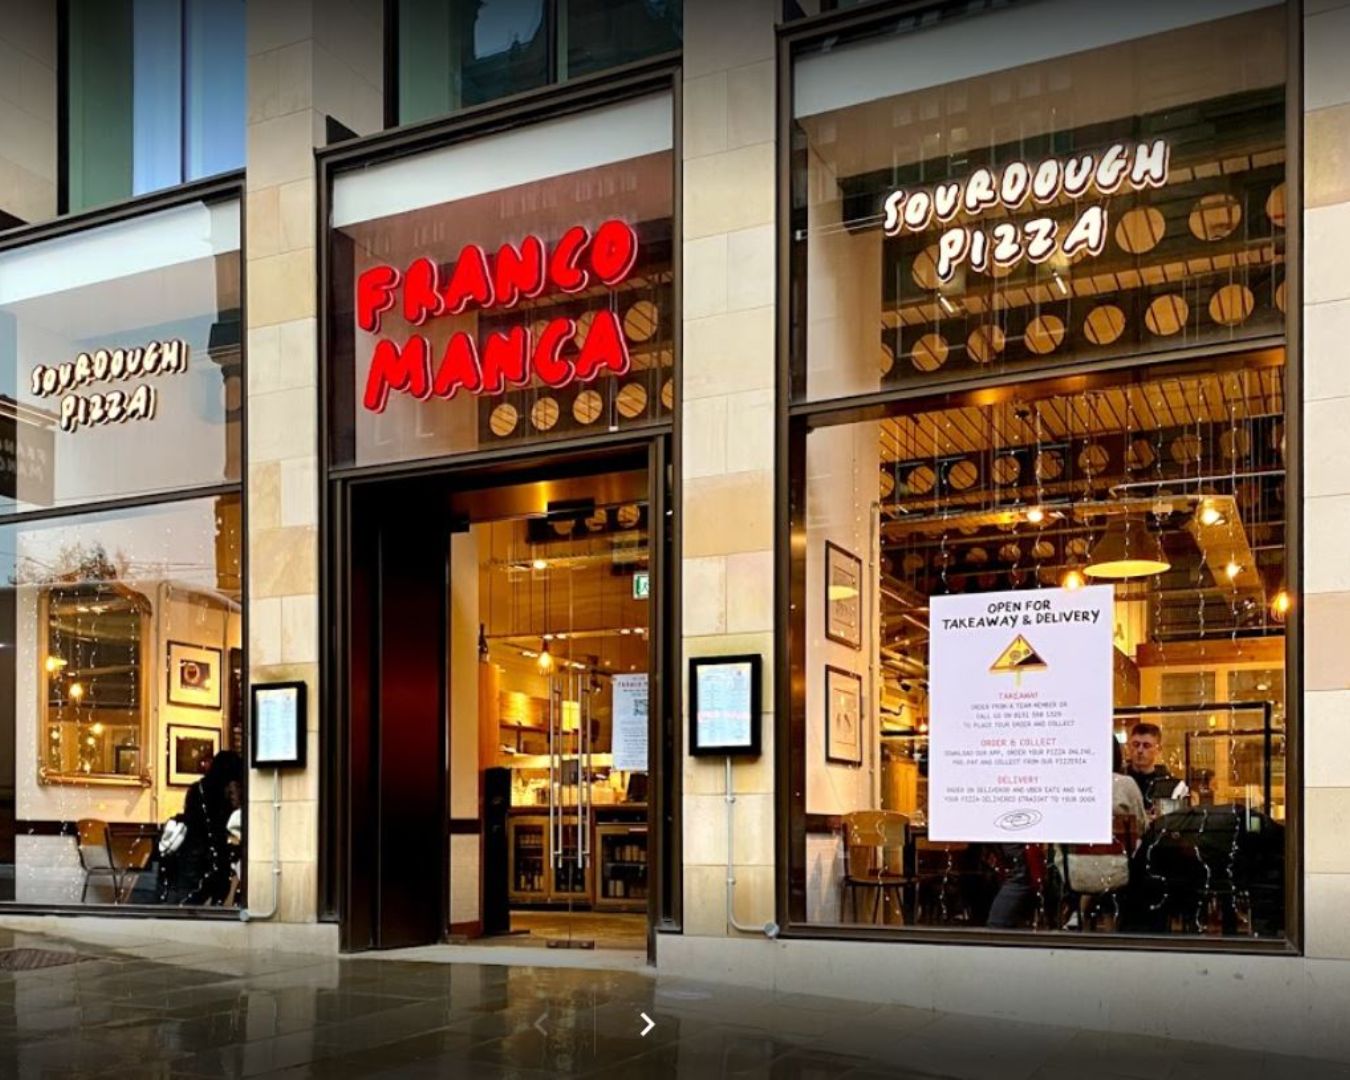 outdoor appearance of Franco Manca